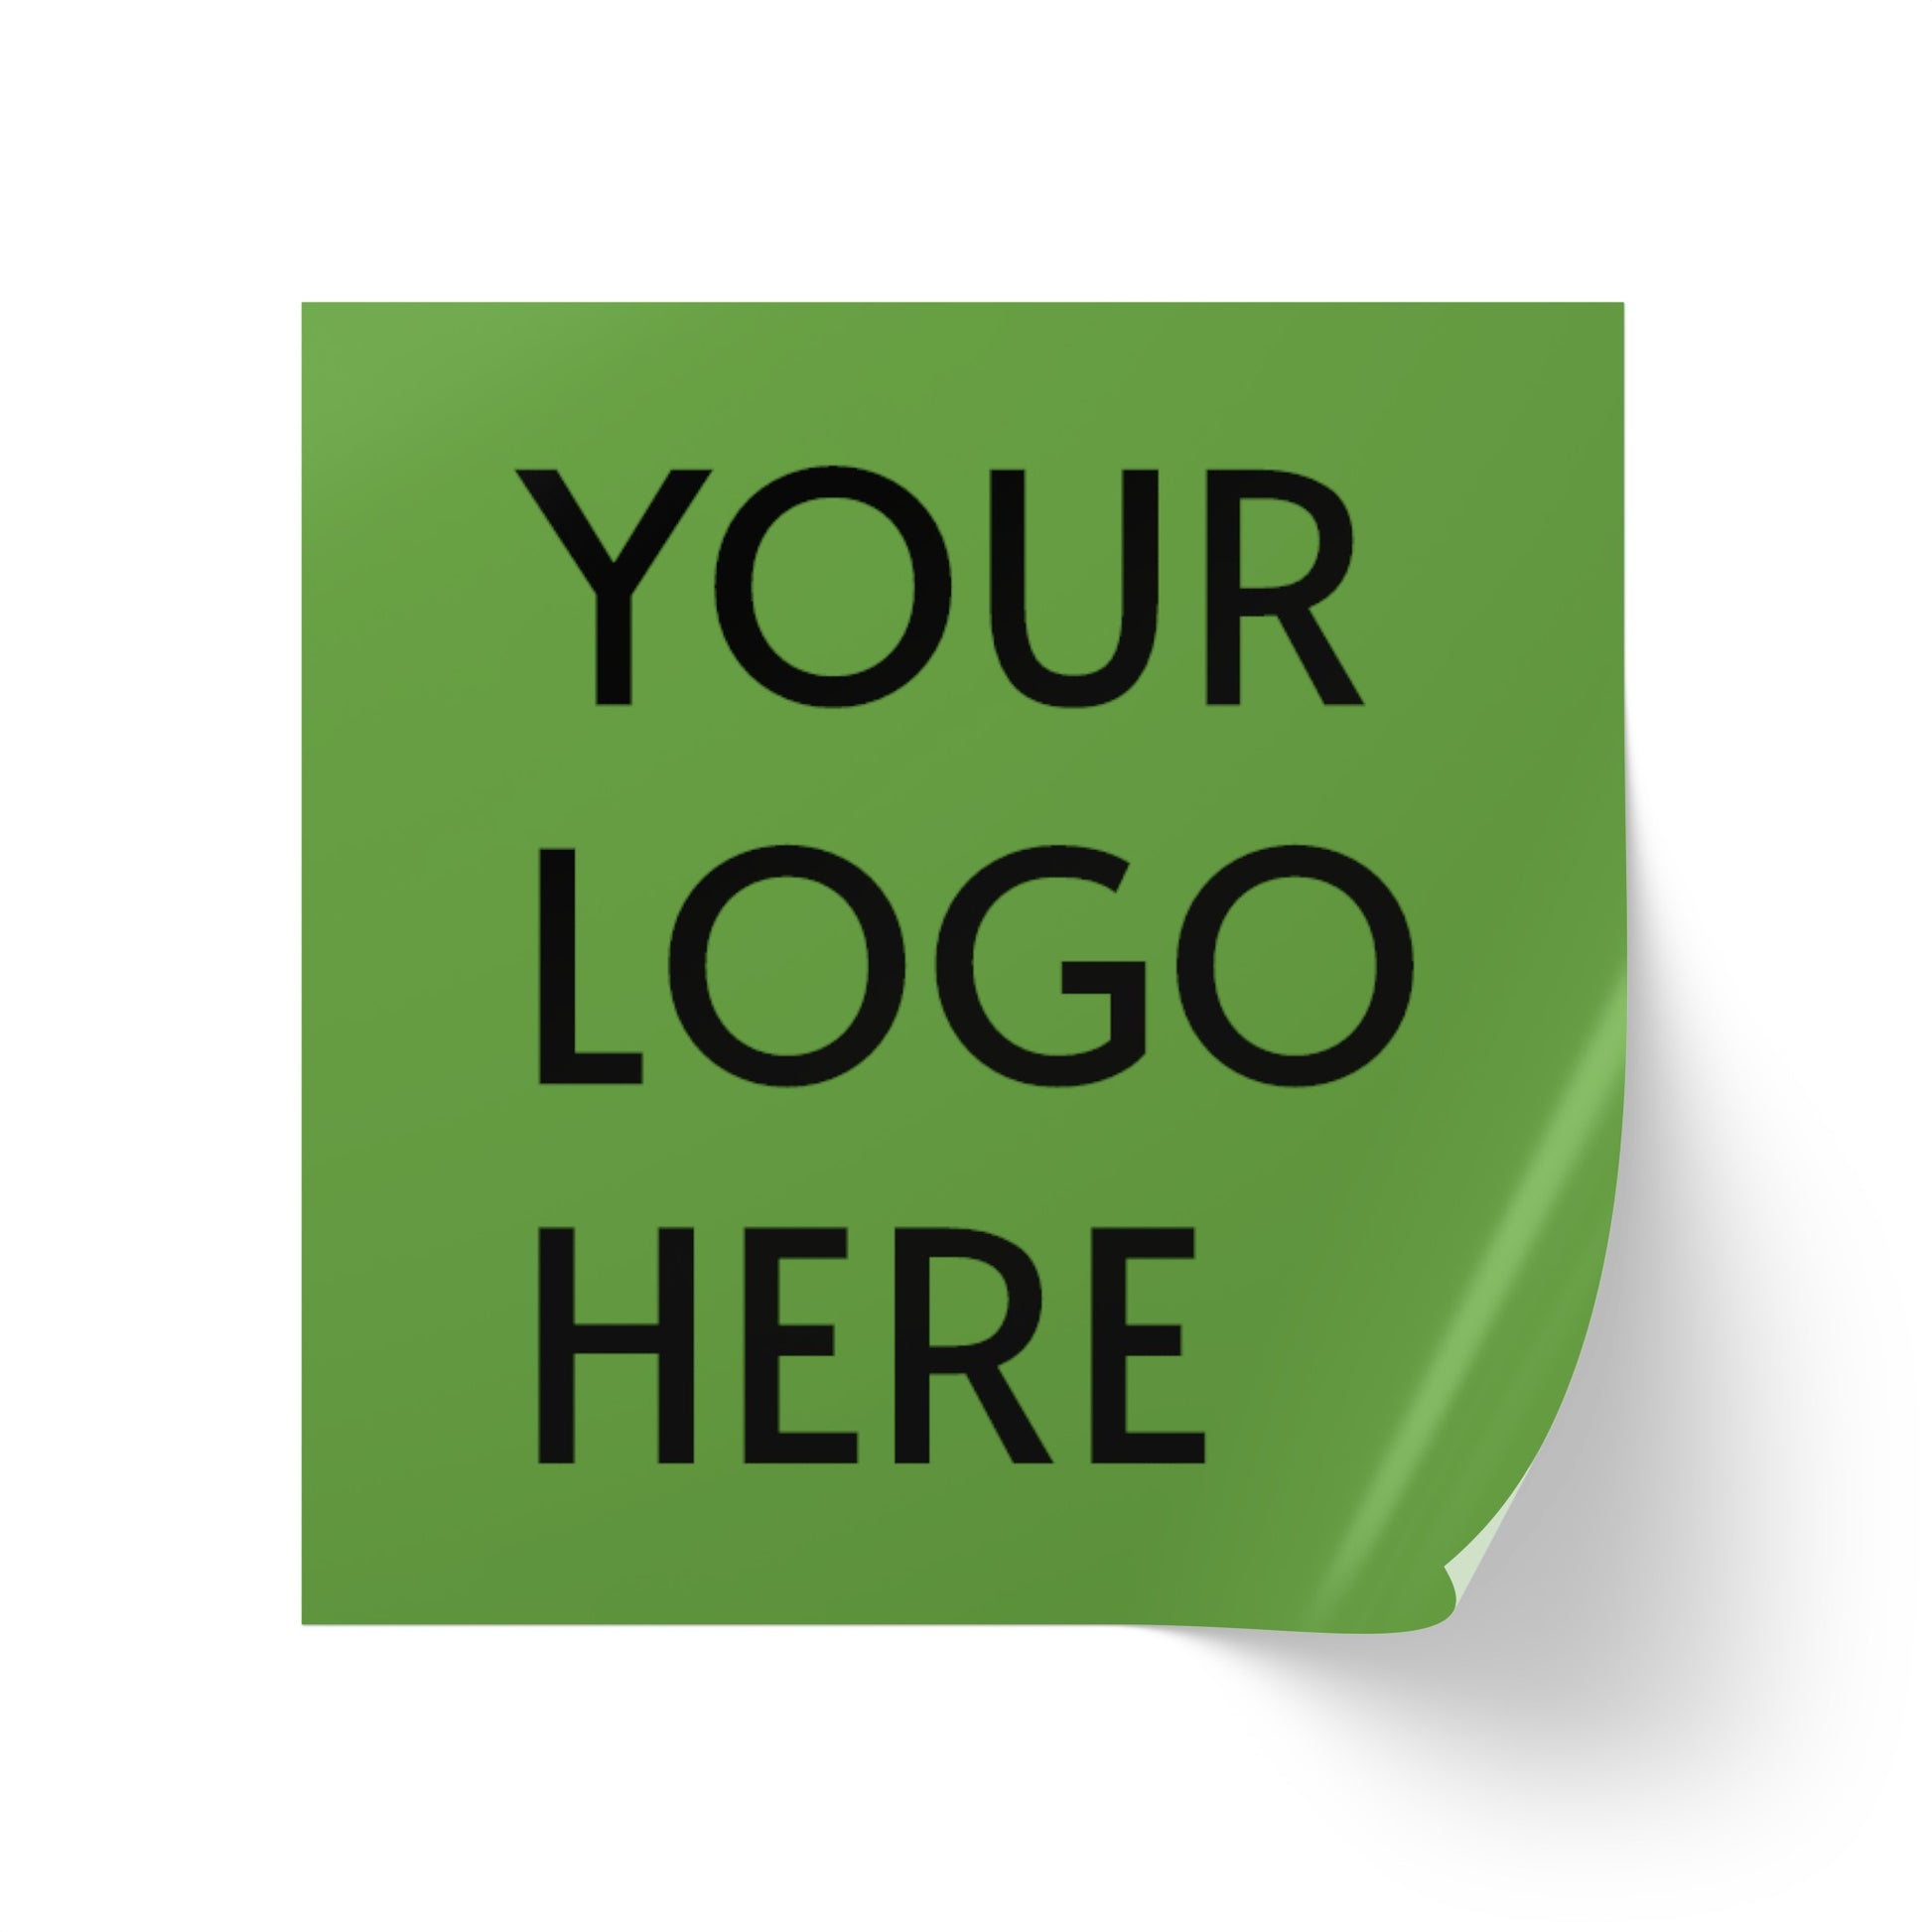 Customizable square sticker labels for events